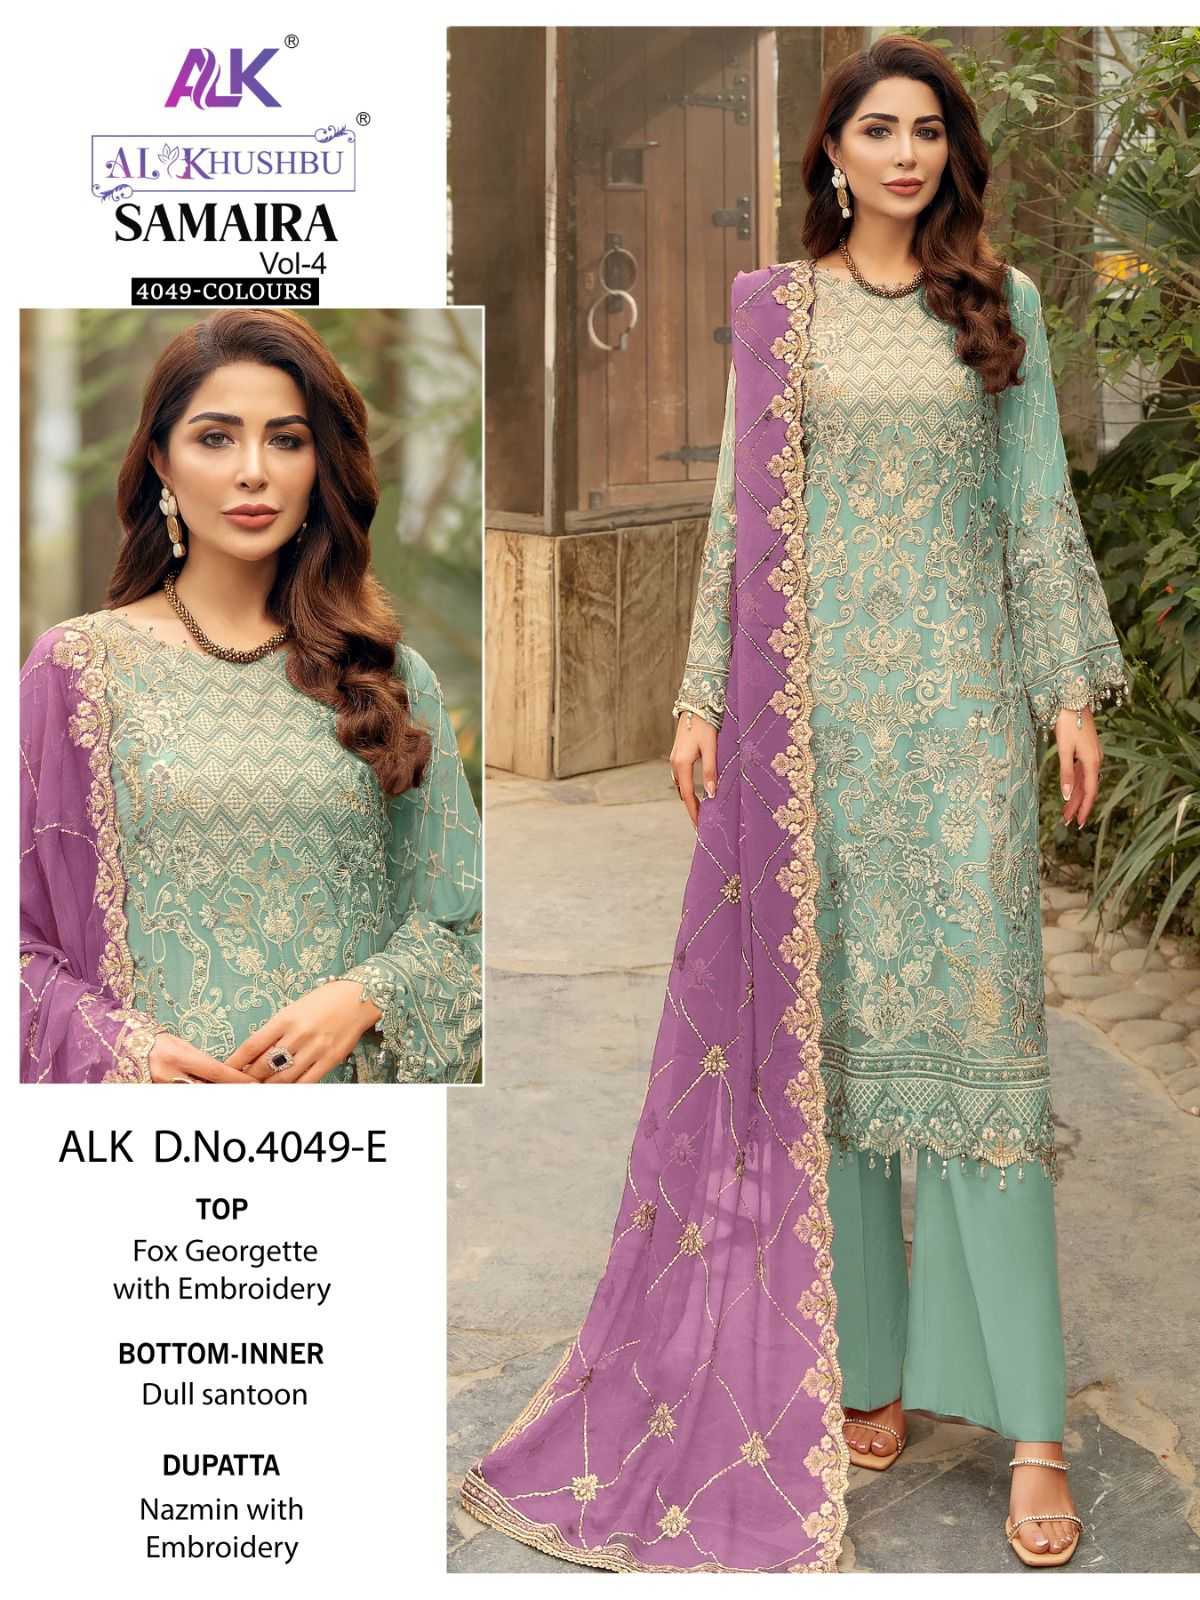 Al Khushbu Samaira Vol 4 4049 Colours Georgette with Embroidery Latest Pakistani suits Collection - jilaniwholesalesuit